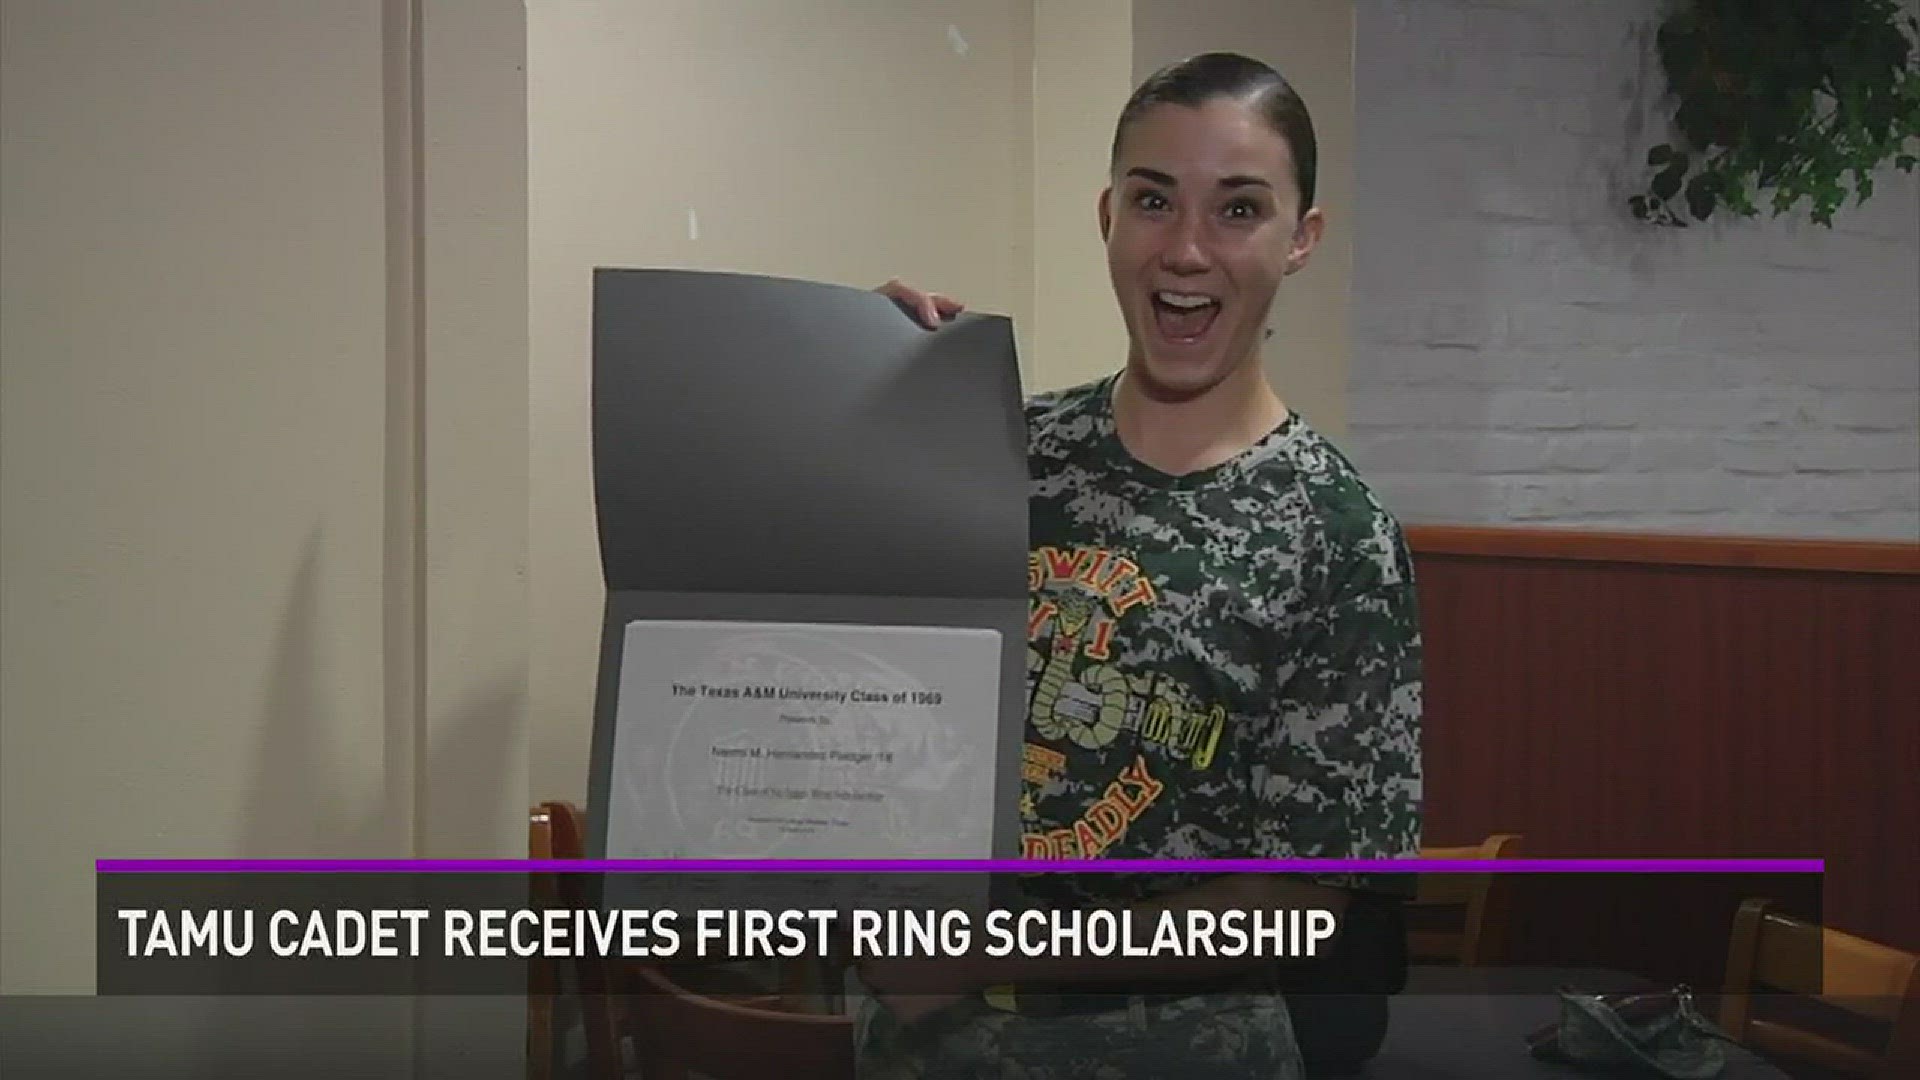 A pleasant surprise for a Texas A&M Cadet as she received a scholarship for her Aggie Ring.